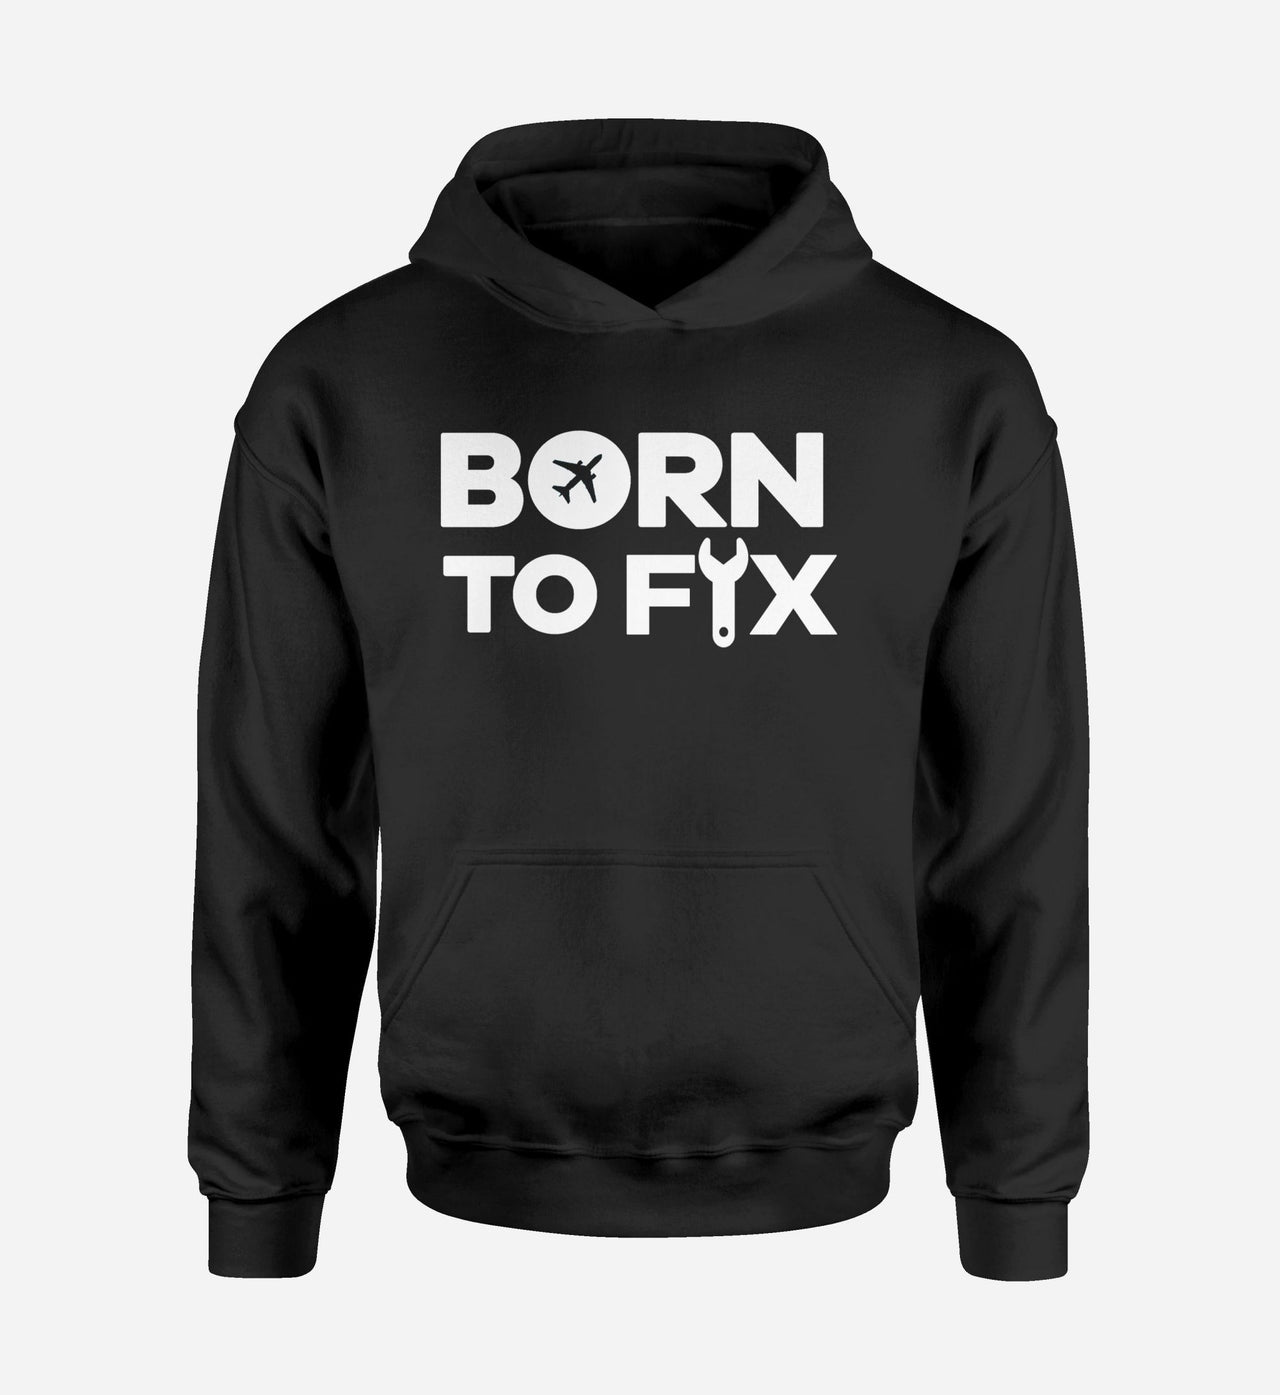 Born To Fix Airplanes Designed Hoodies